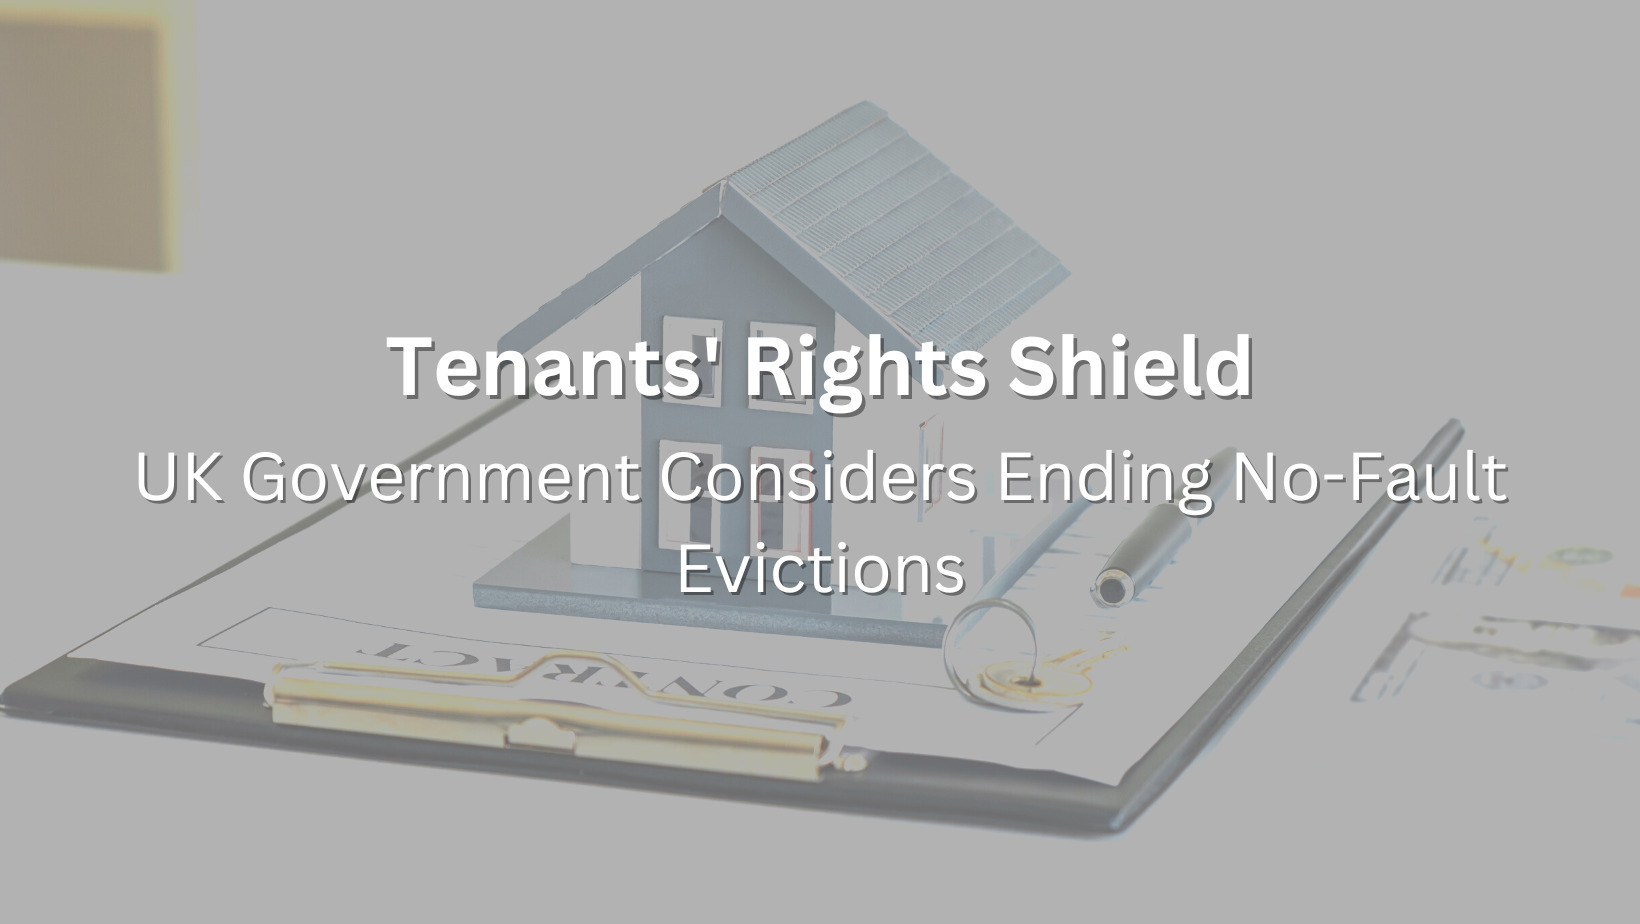 Tenants’ Rights Shield: UK Government Considers Ending No-Fault Evictions